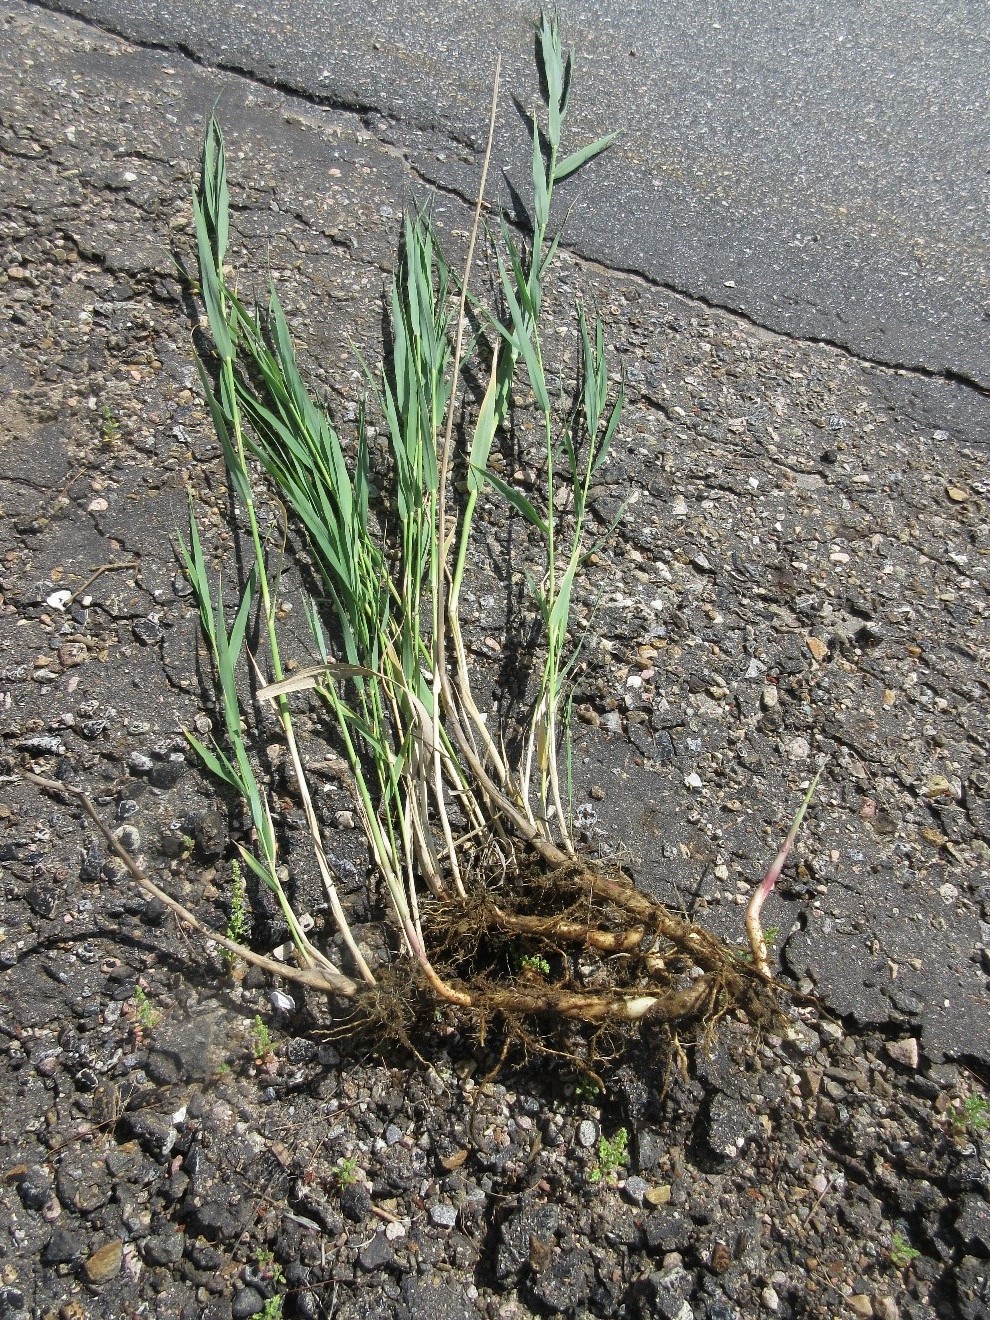 Phragmites removed from Hwy 60 in Algonquin Provincial Park showing extensive root growth connecting above ground vegetation.  Photo: Alison Lake